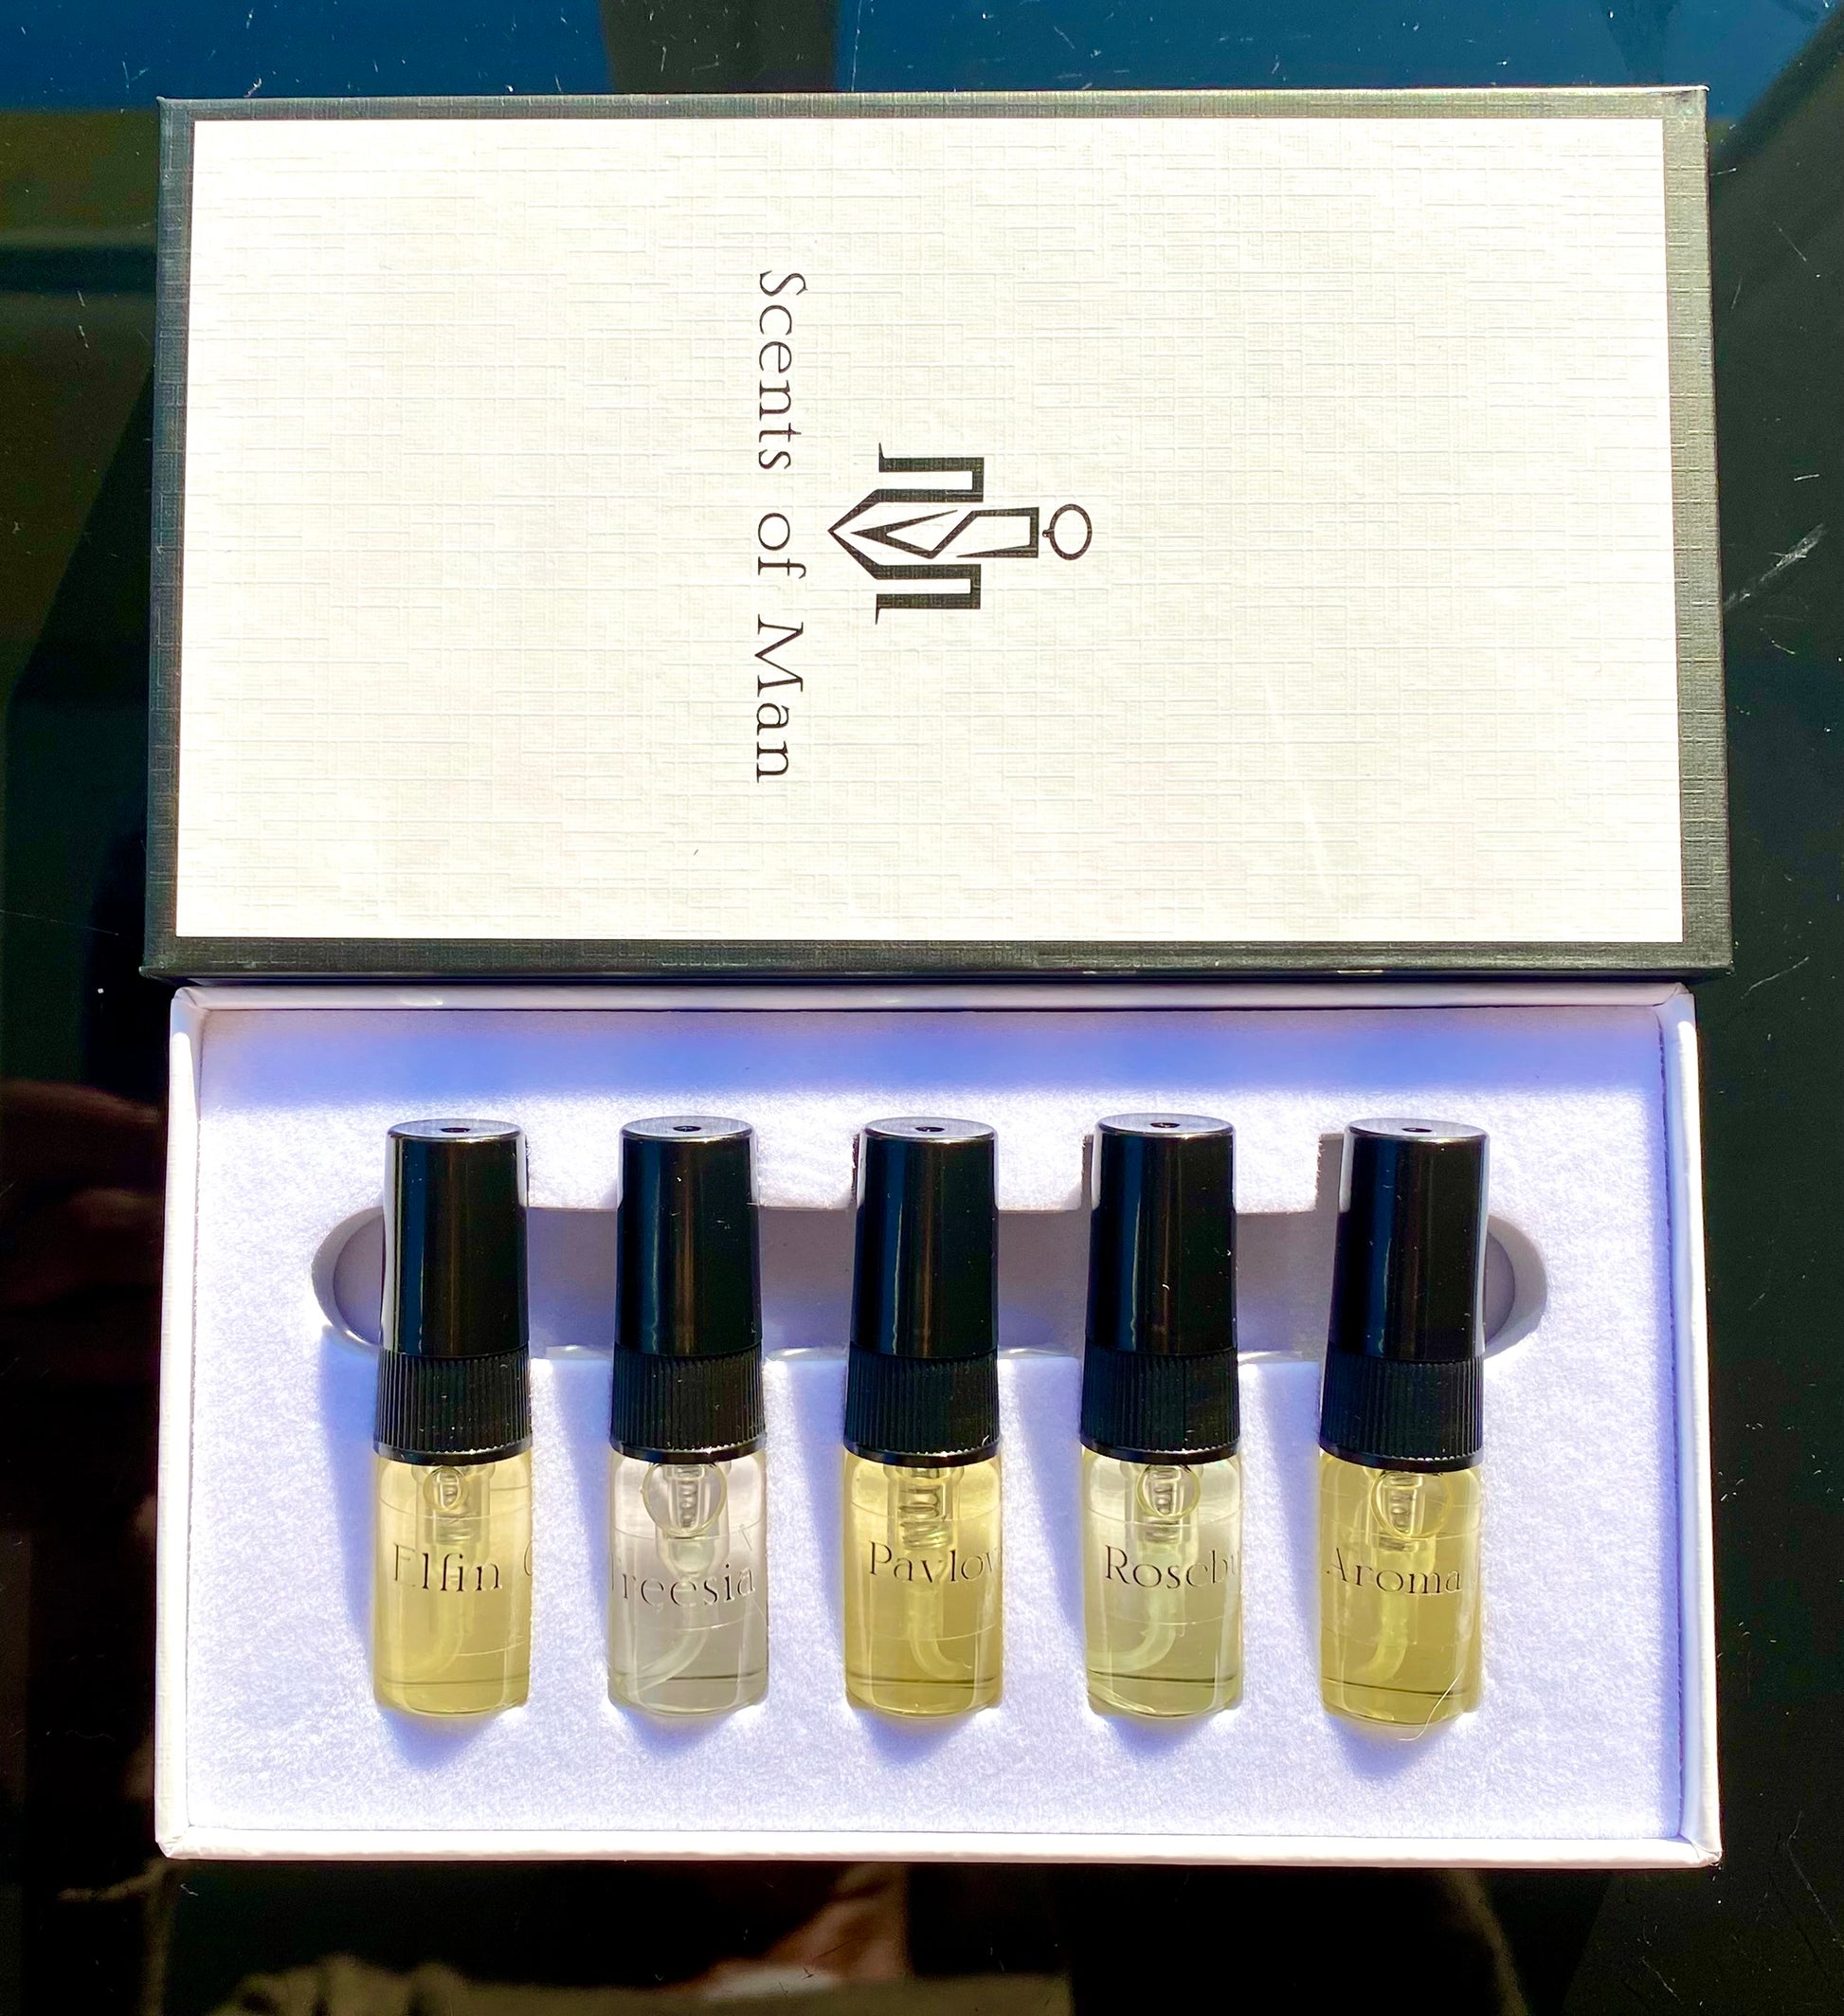 5 scent box, showing just the 5 glass spray bottles.